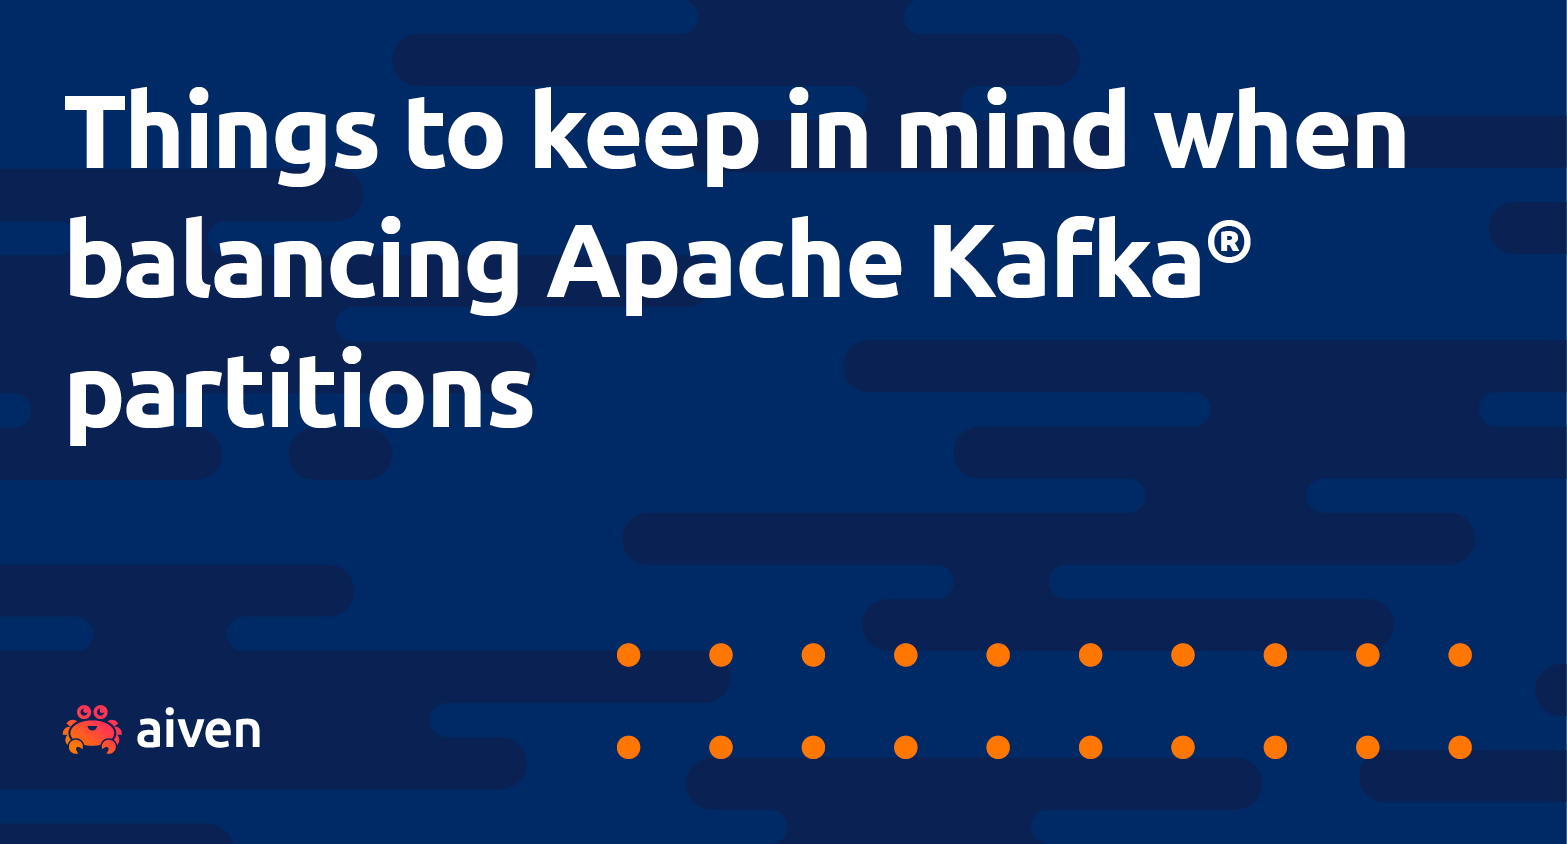 Blue image with Aiven crab logo and a grid of red dots. Text reads: Things to keep in mind when balancing Apache Kafka® partitions.